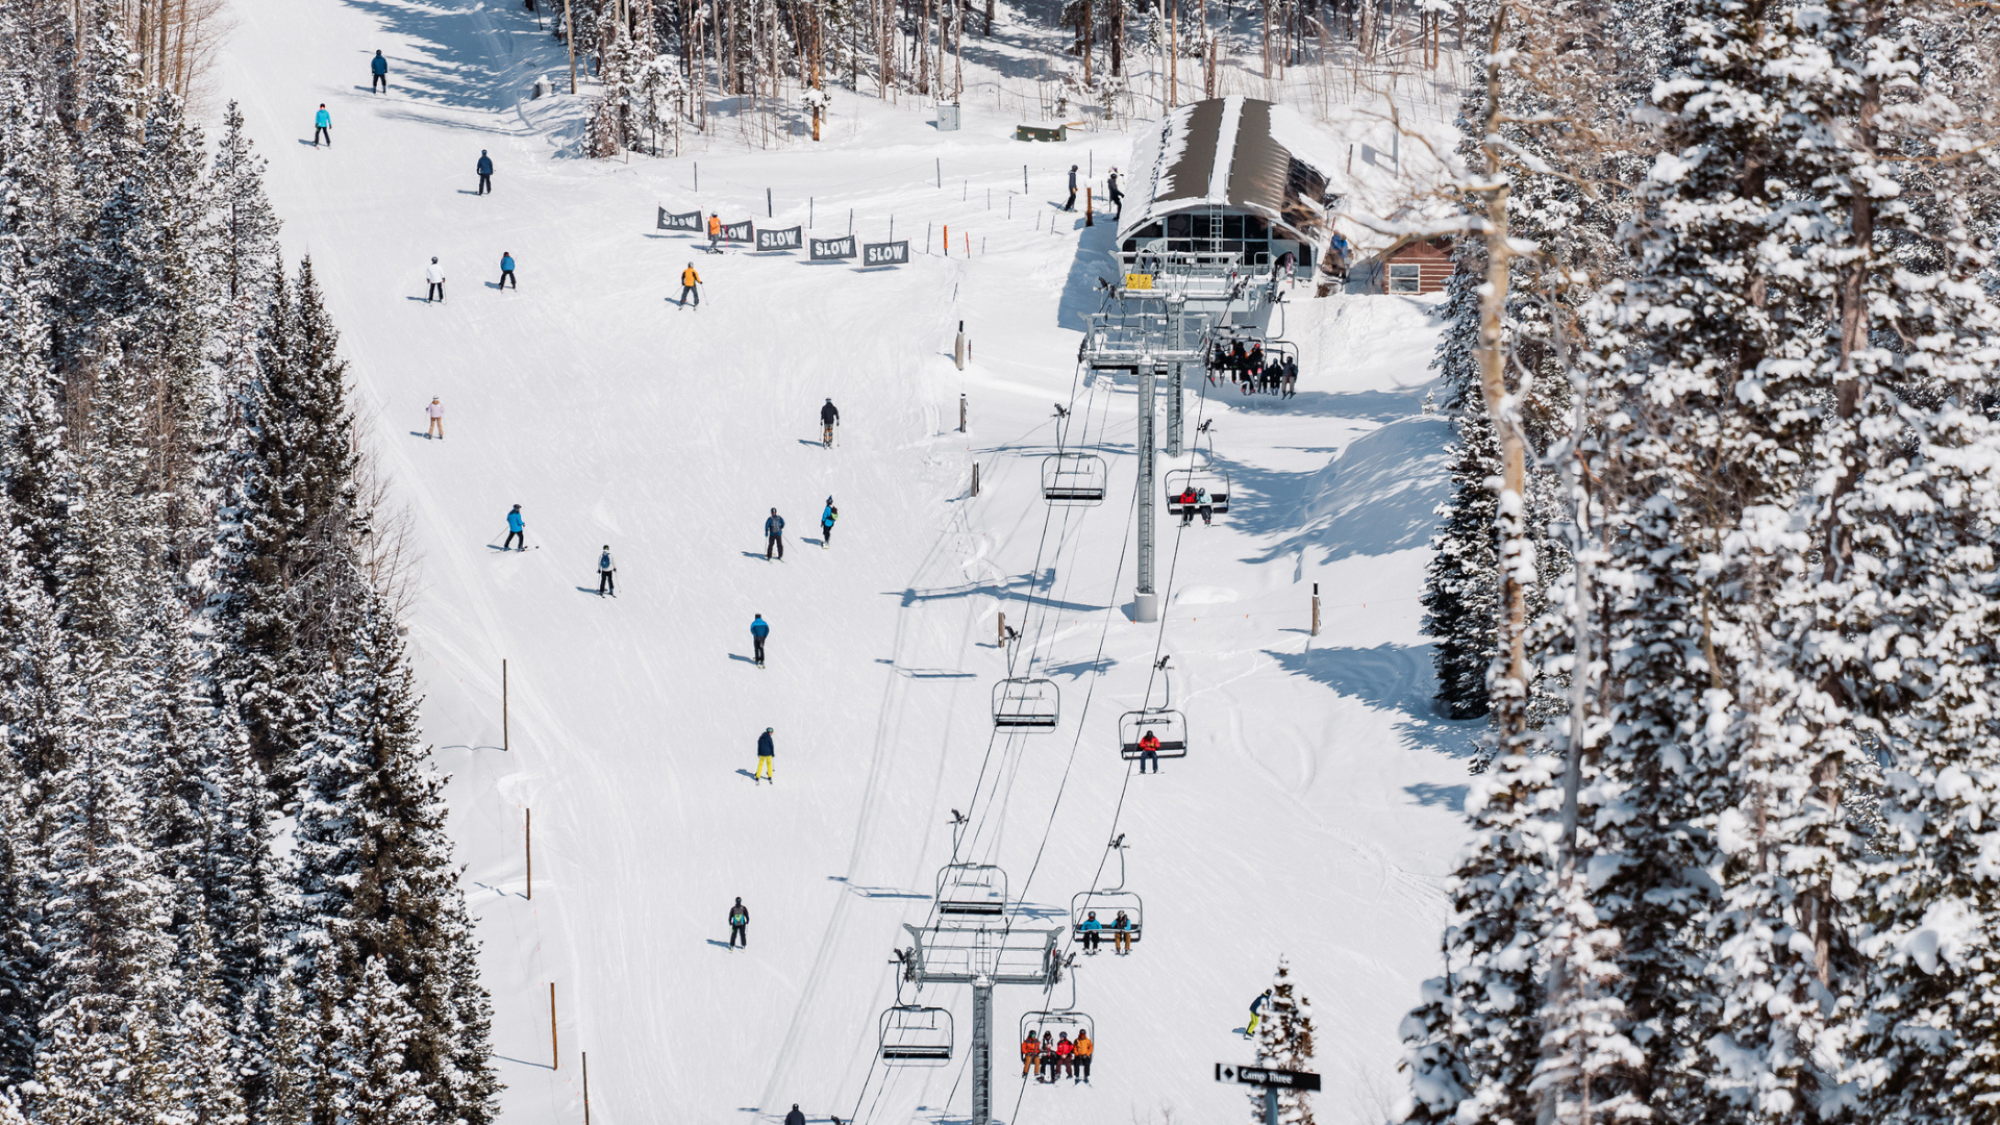 A snowy ski resort with skiers and snowboarders on slopes, surrounded by snow-covered trees and a ski lift leading to a building.